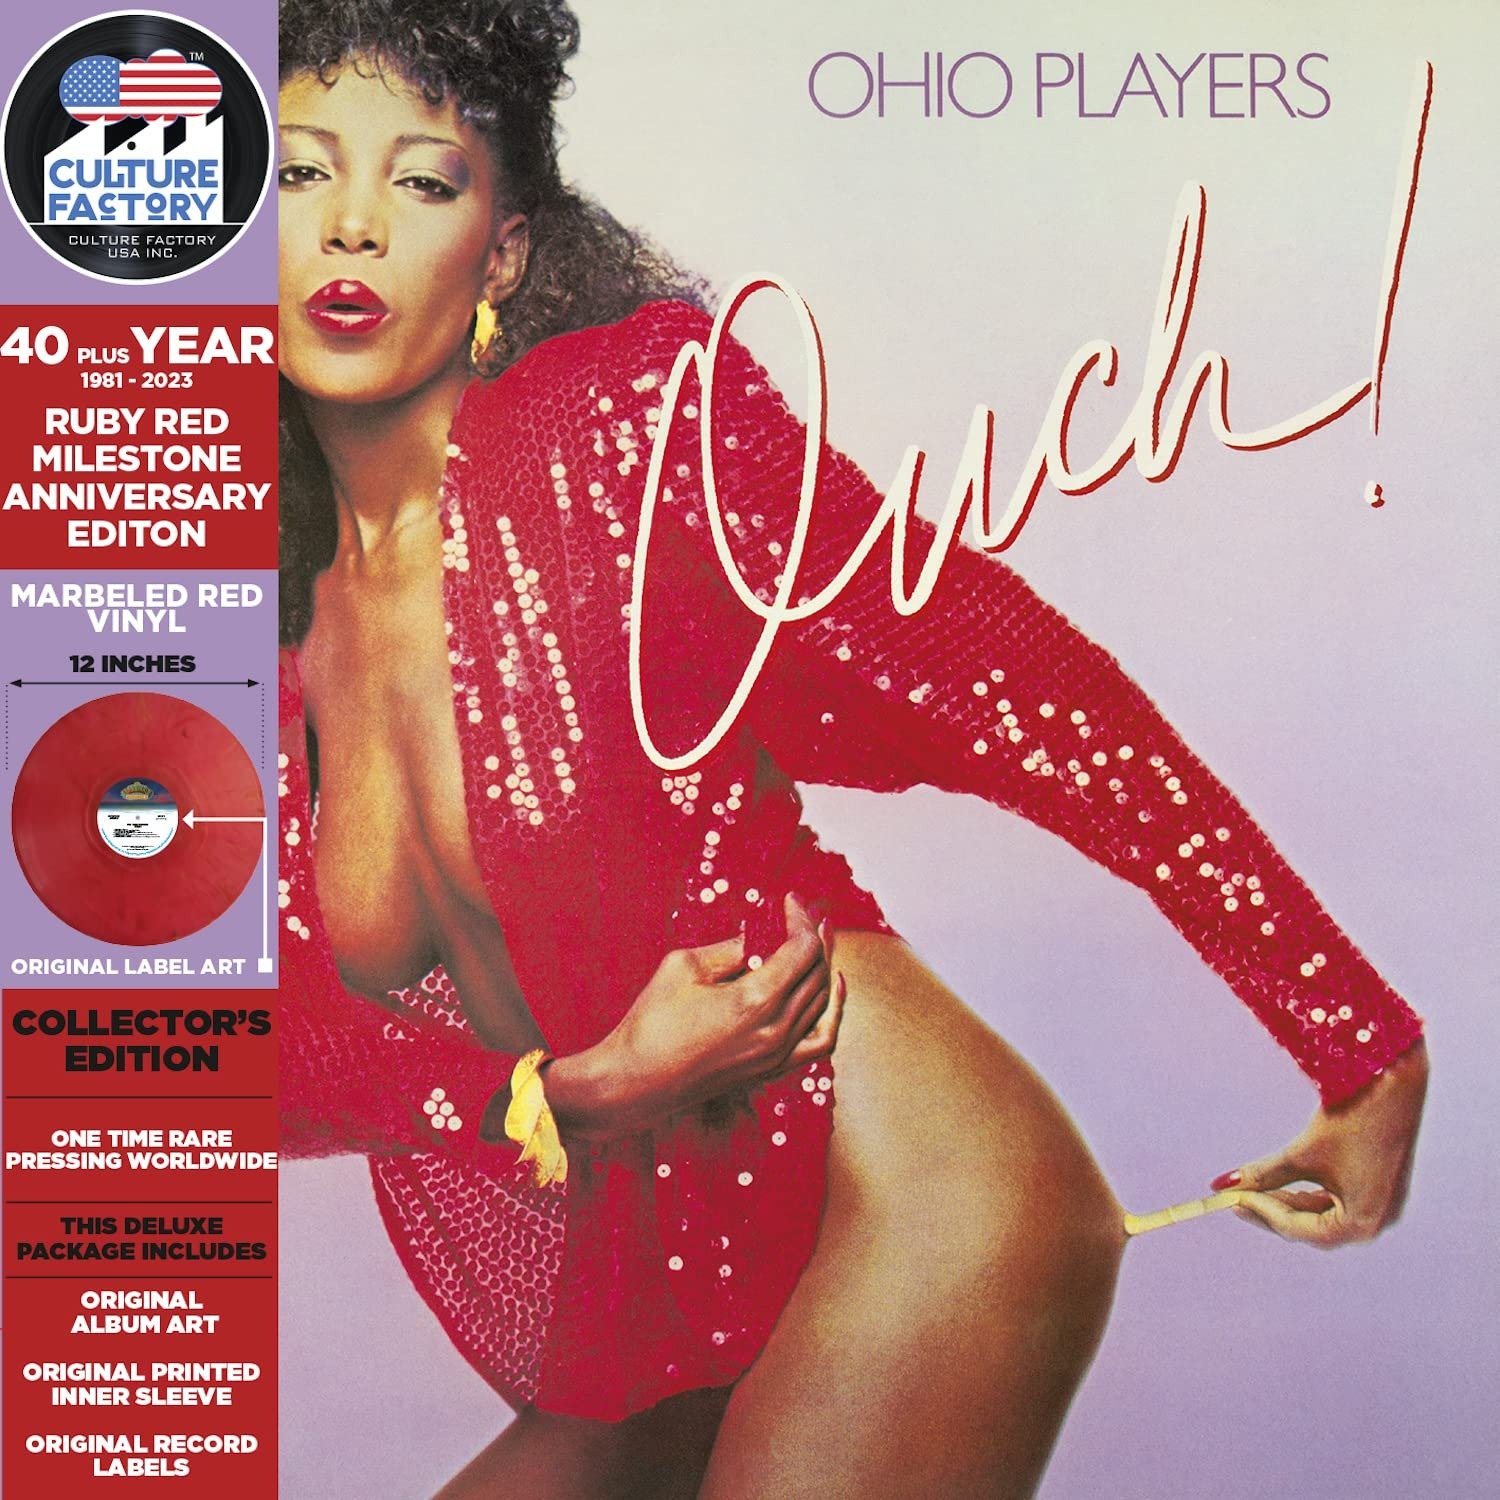 CD Shop - OHIO PLAYERS OUCH!